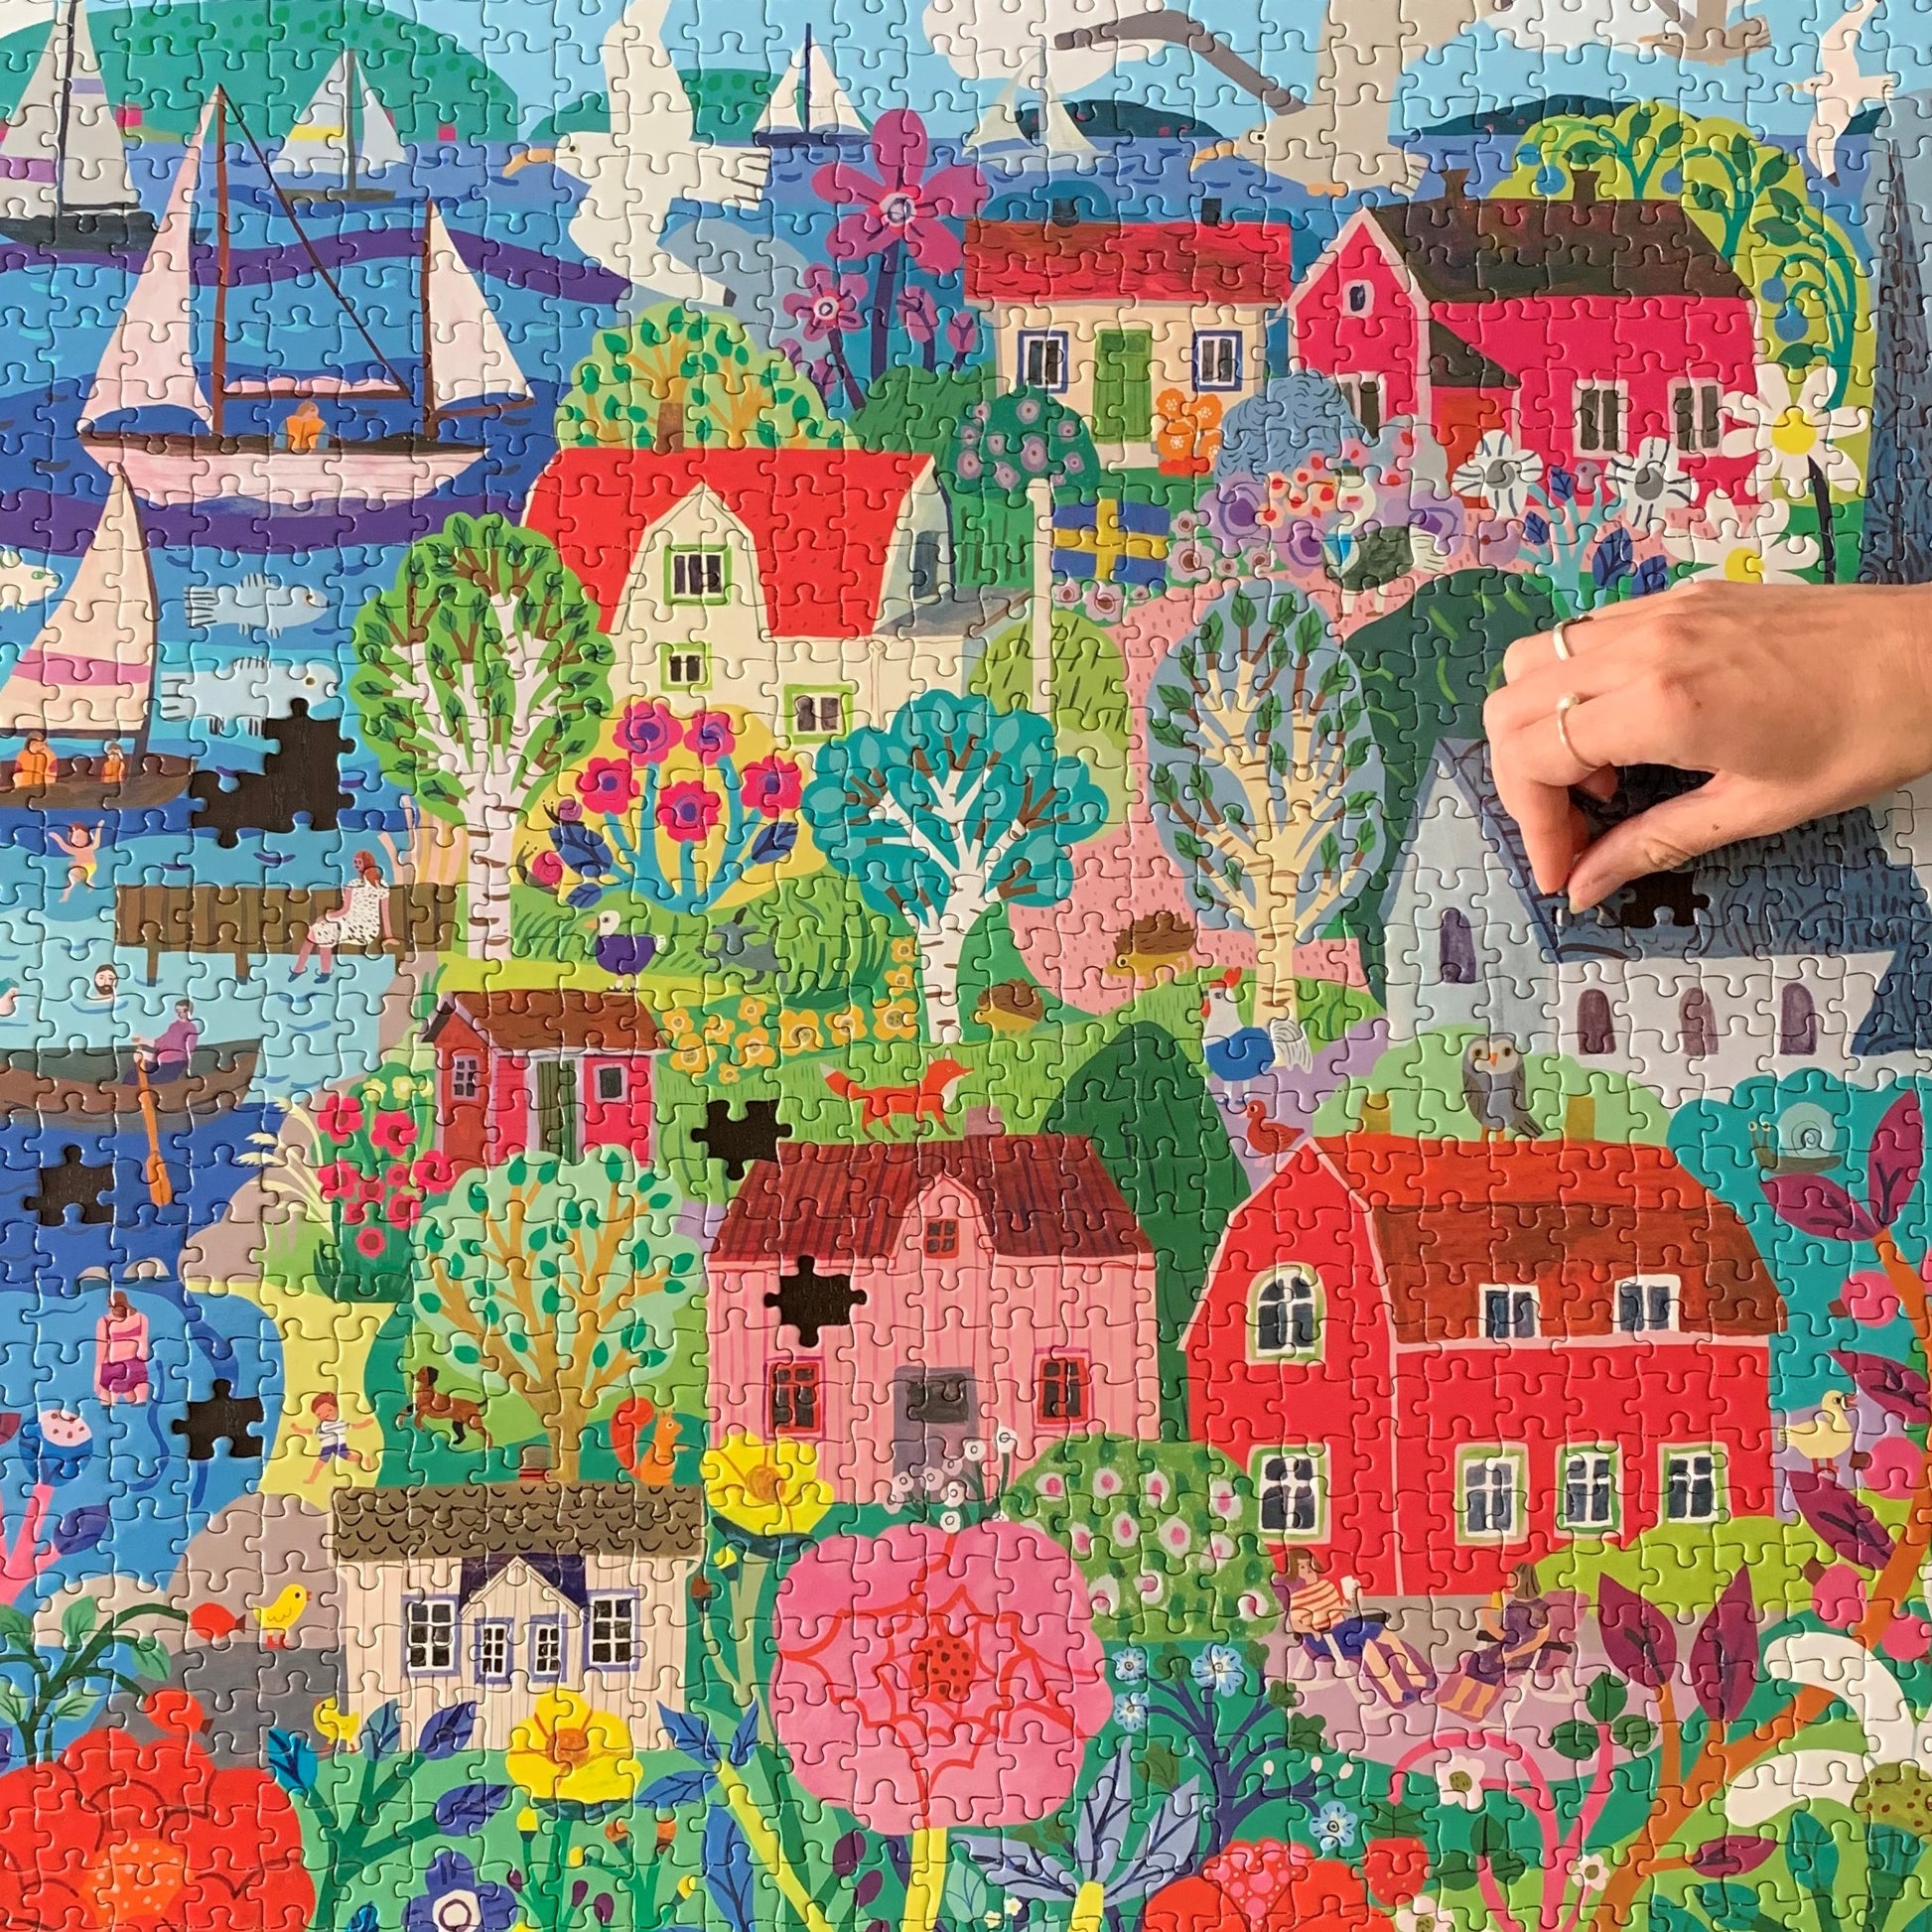 Swedish Fishing Village 1000 Piece Jigsaw Puzzle | eeBoo Piece & Love | Cute Gifts for Travel Lovers